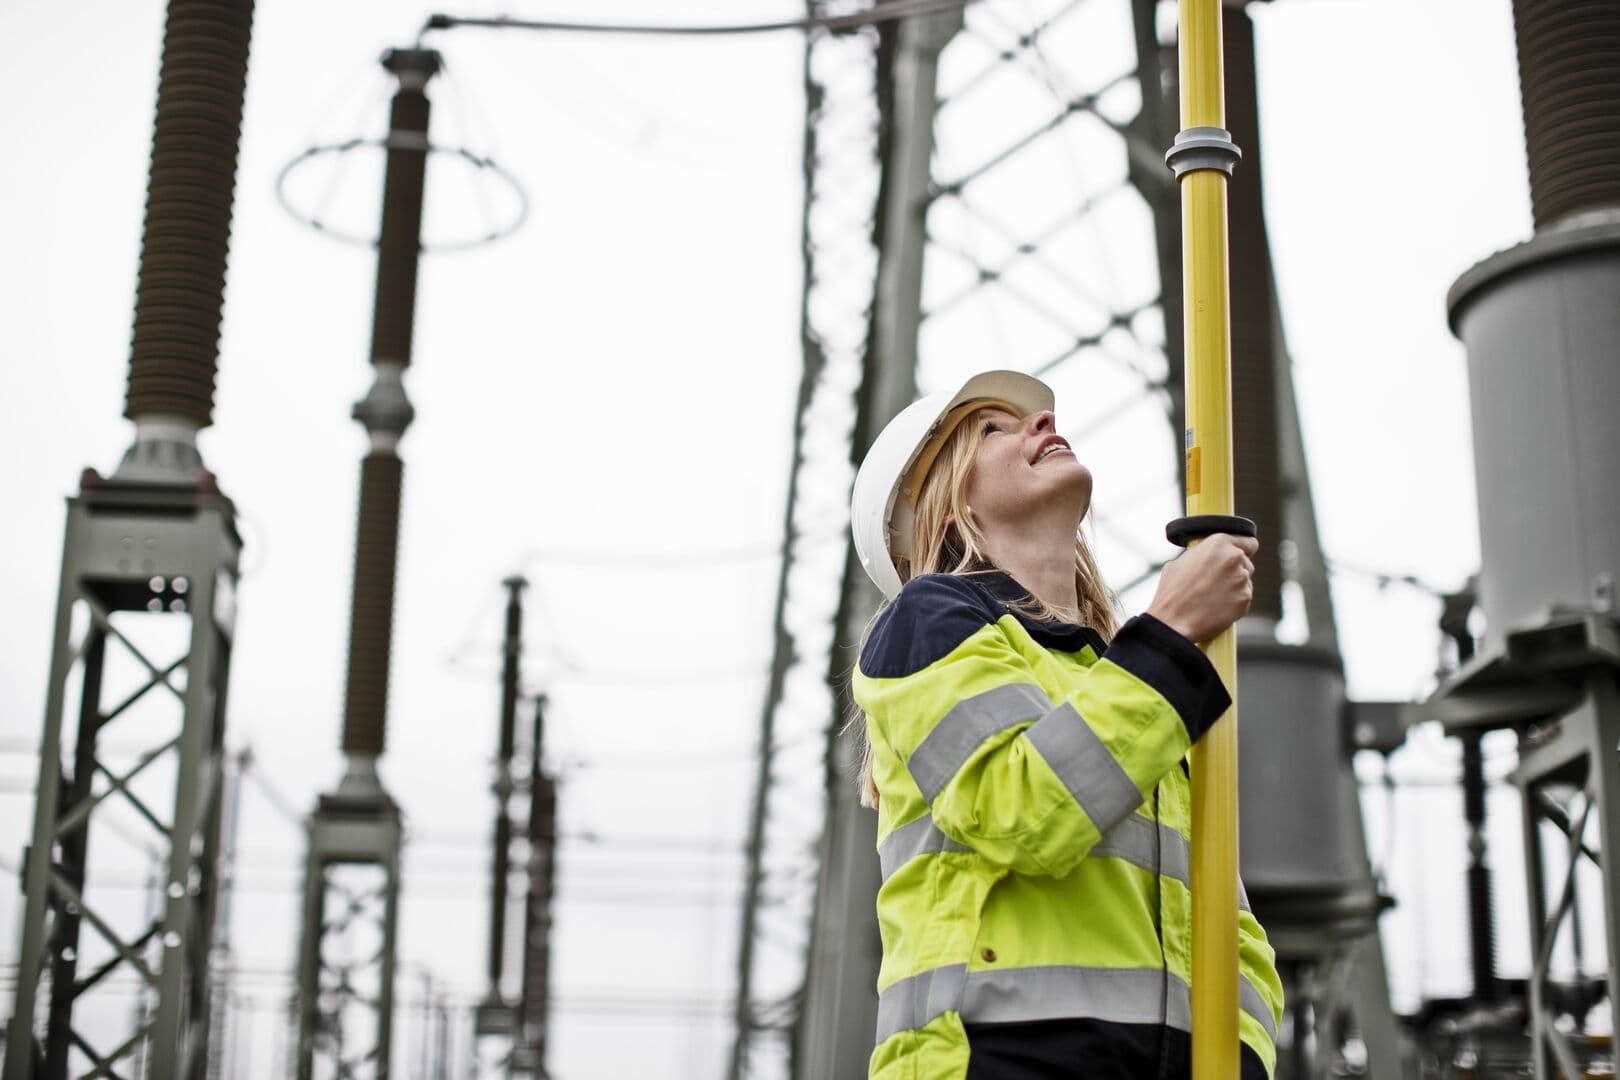 TenneT employee working at a substation